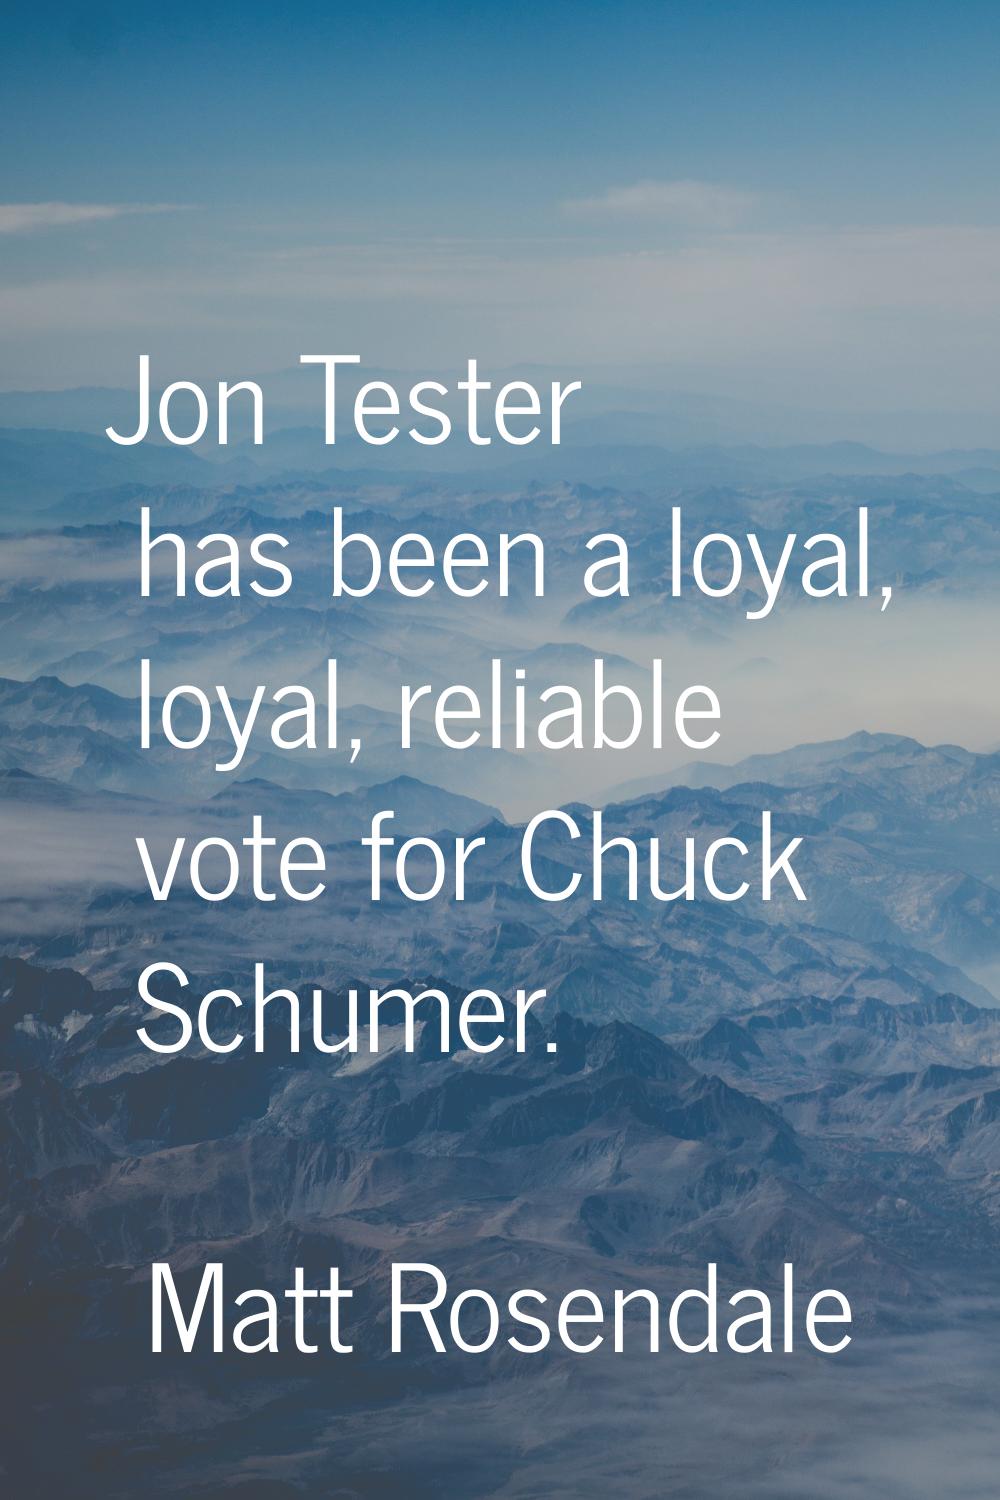 Jon Tester has been a loyal, loyal, reliable vote for Chuck Schumer.